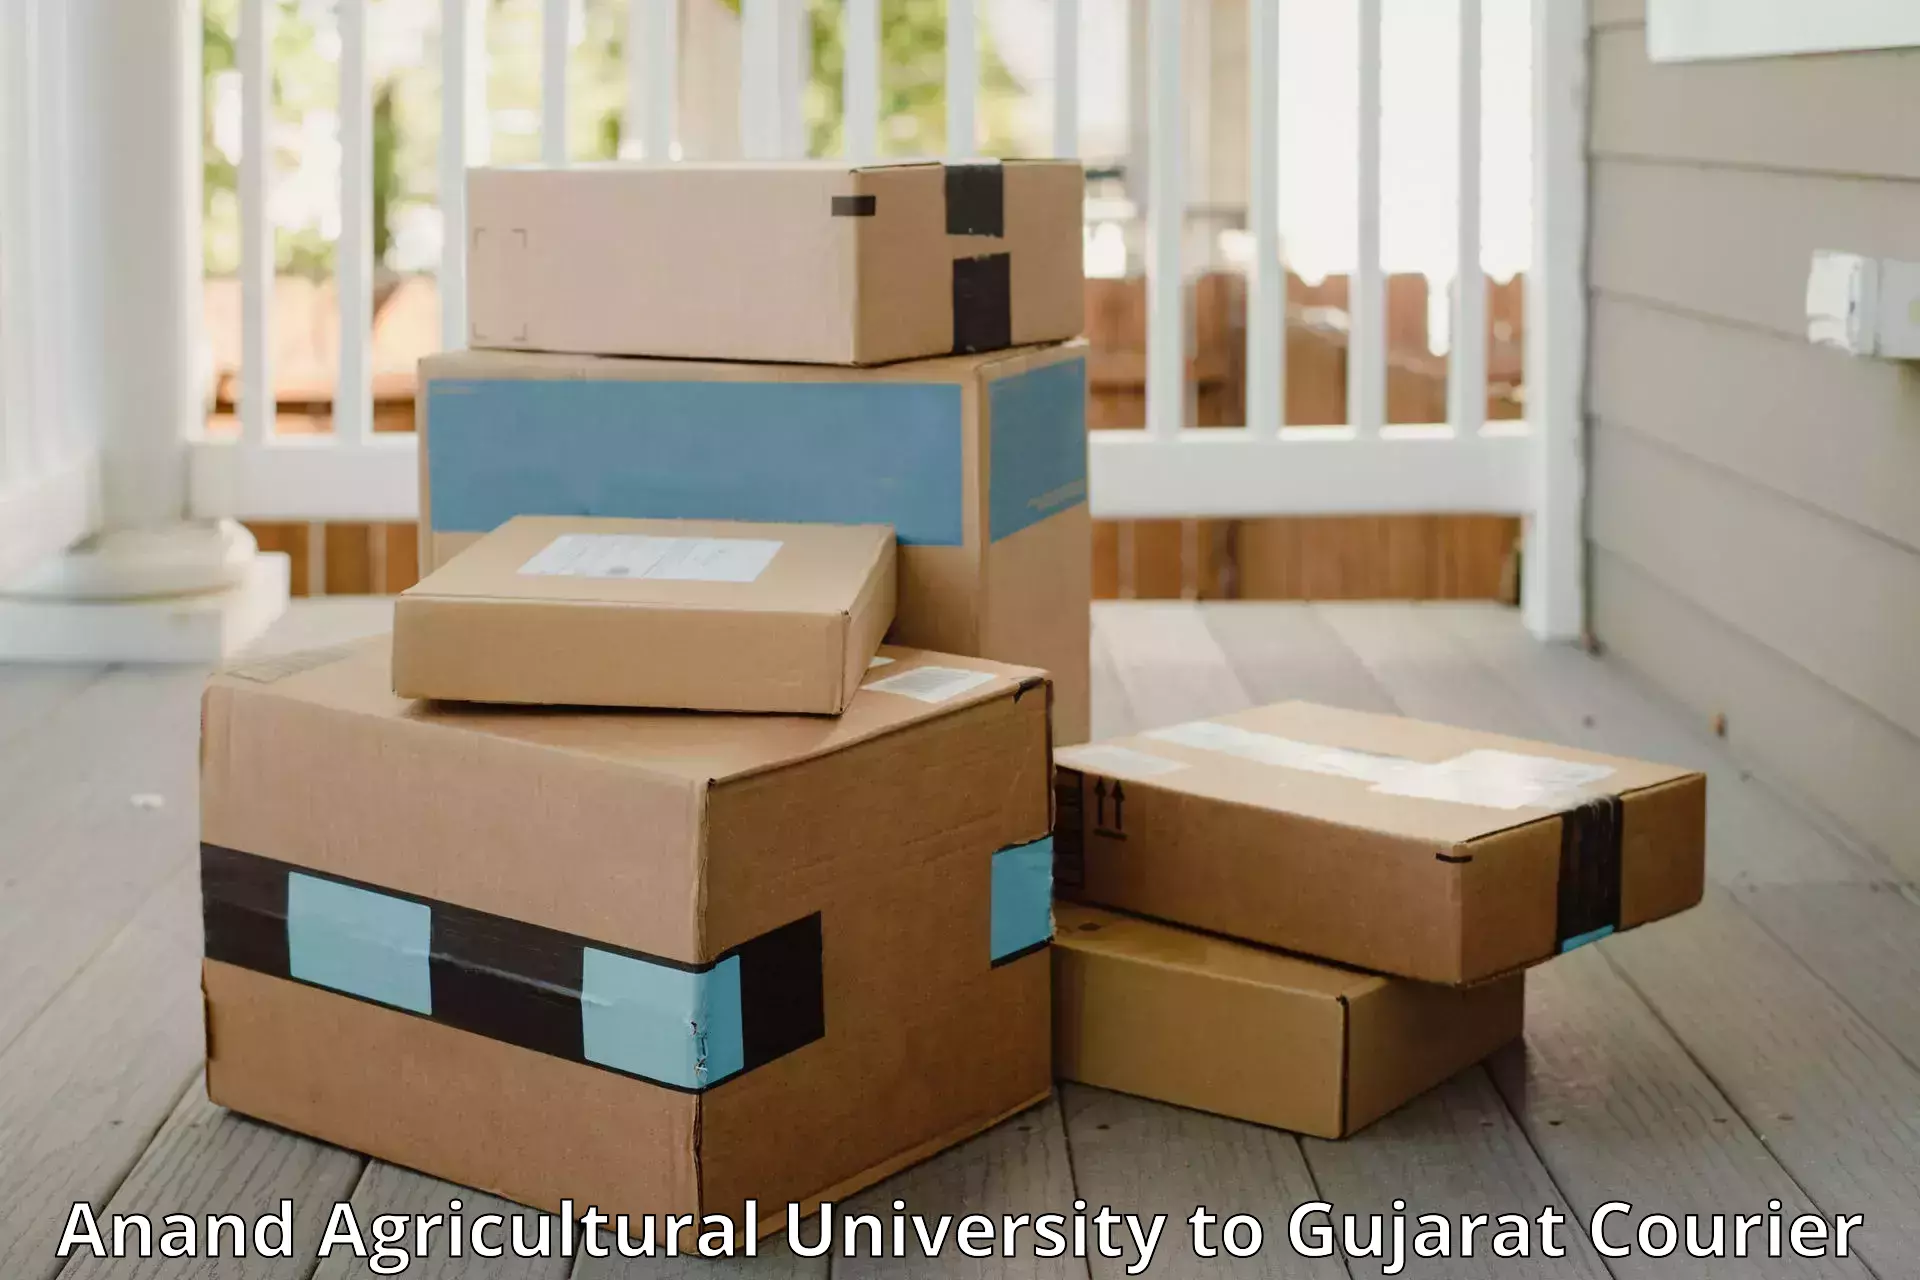 Baggage transport services Anand Agricultural University to Gujarat